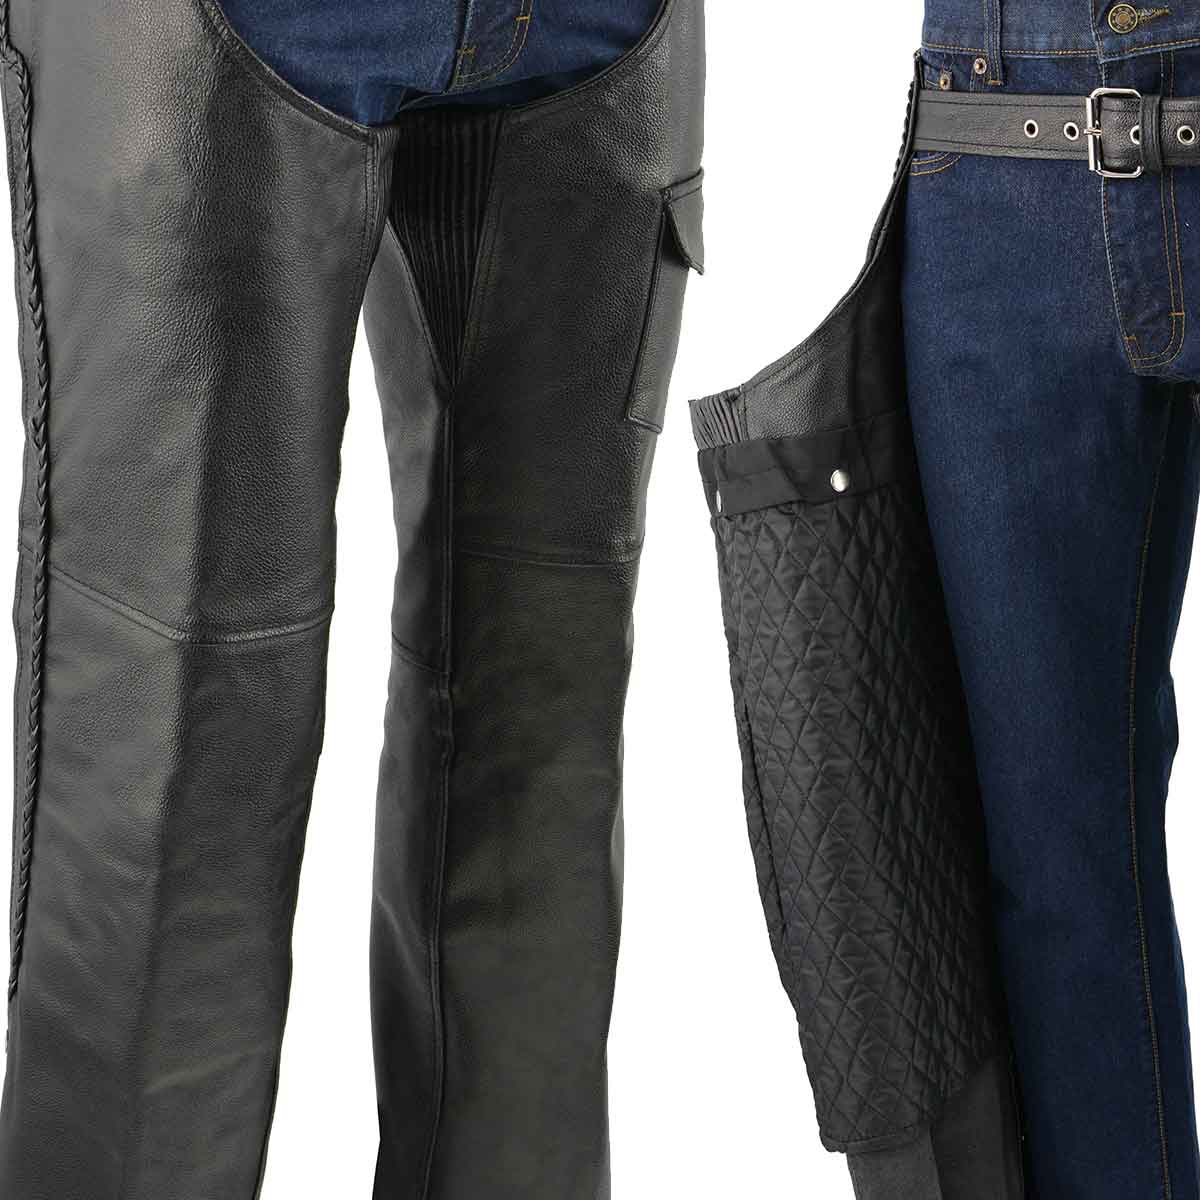 Men's XS406 Classic Black Braided Thermal Lined Leather Motorcycle Chaps with Outside Flap Pocket